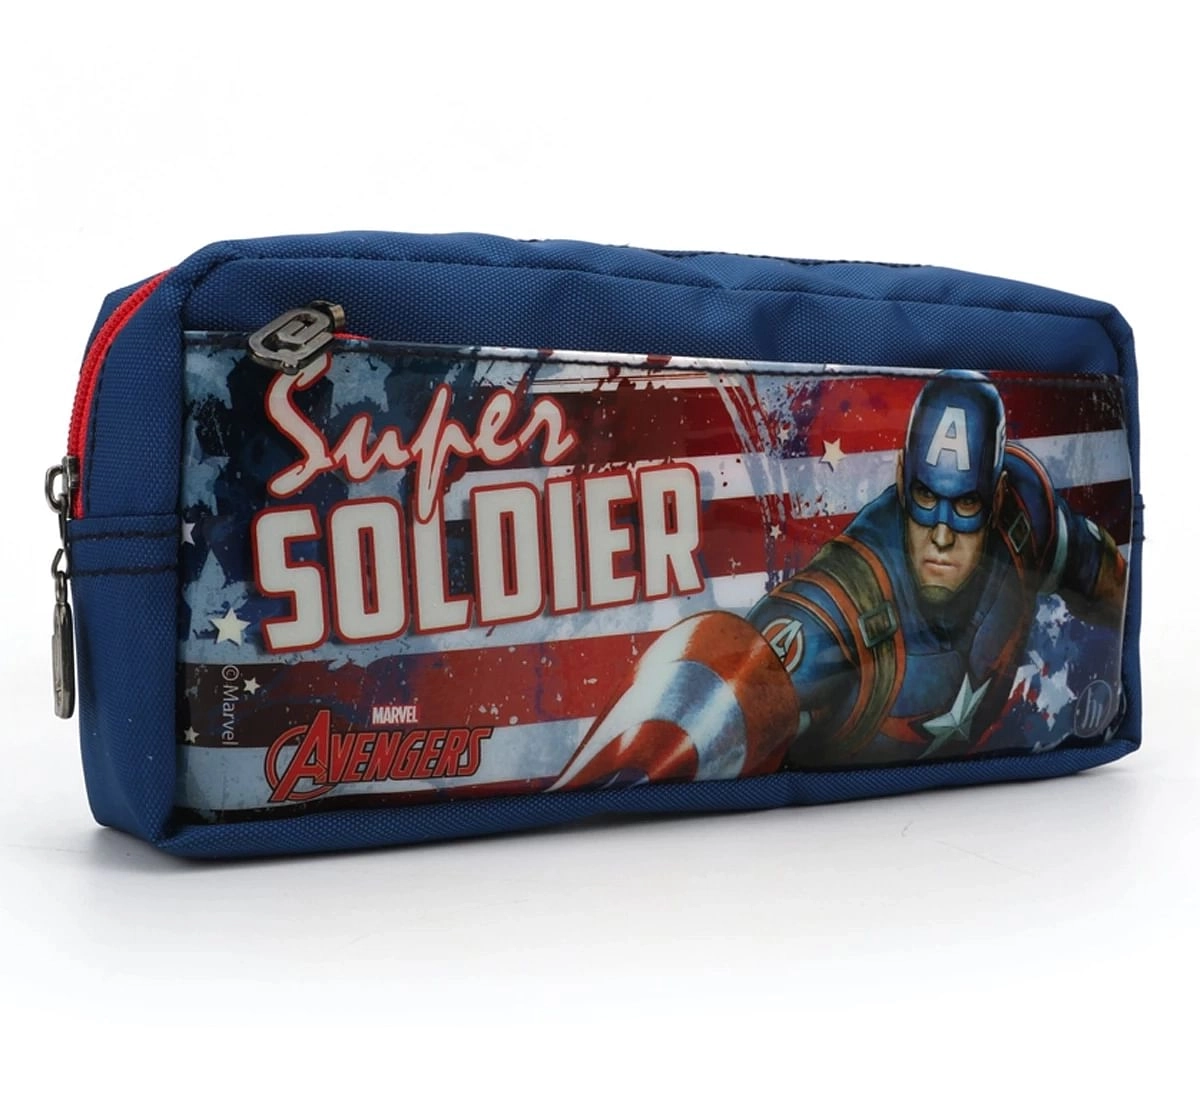 Avengers Captain America Character Pencil Bag for kids Blue 5Y+